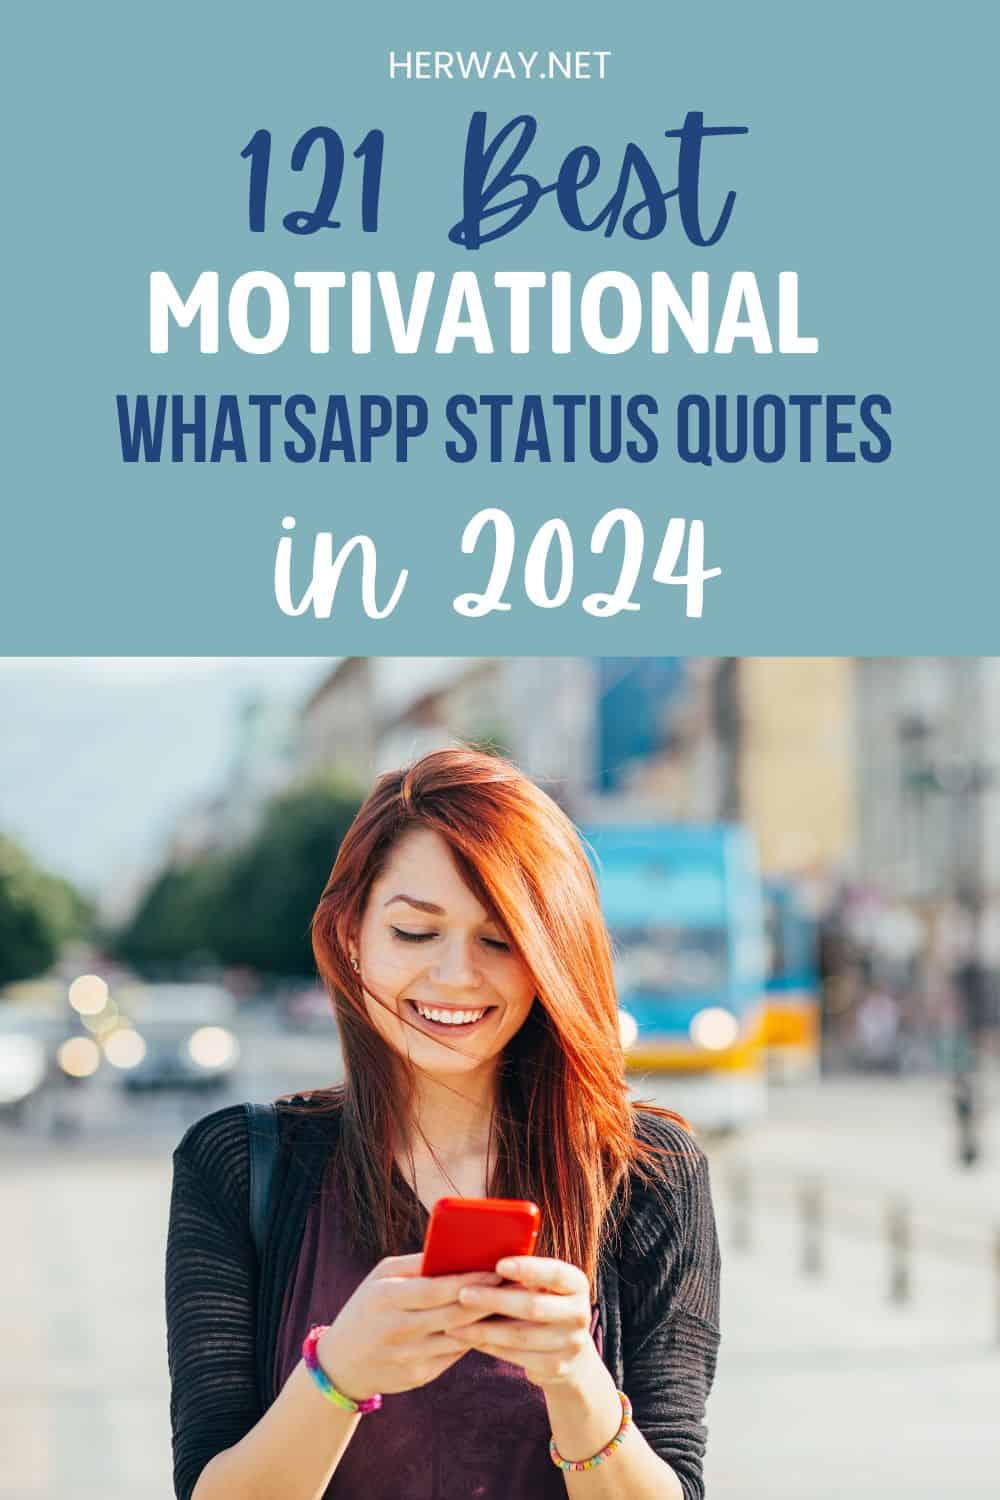 121 Best Motivational WhatsApp Status Quotes In 2024